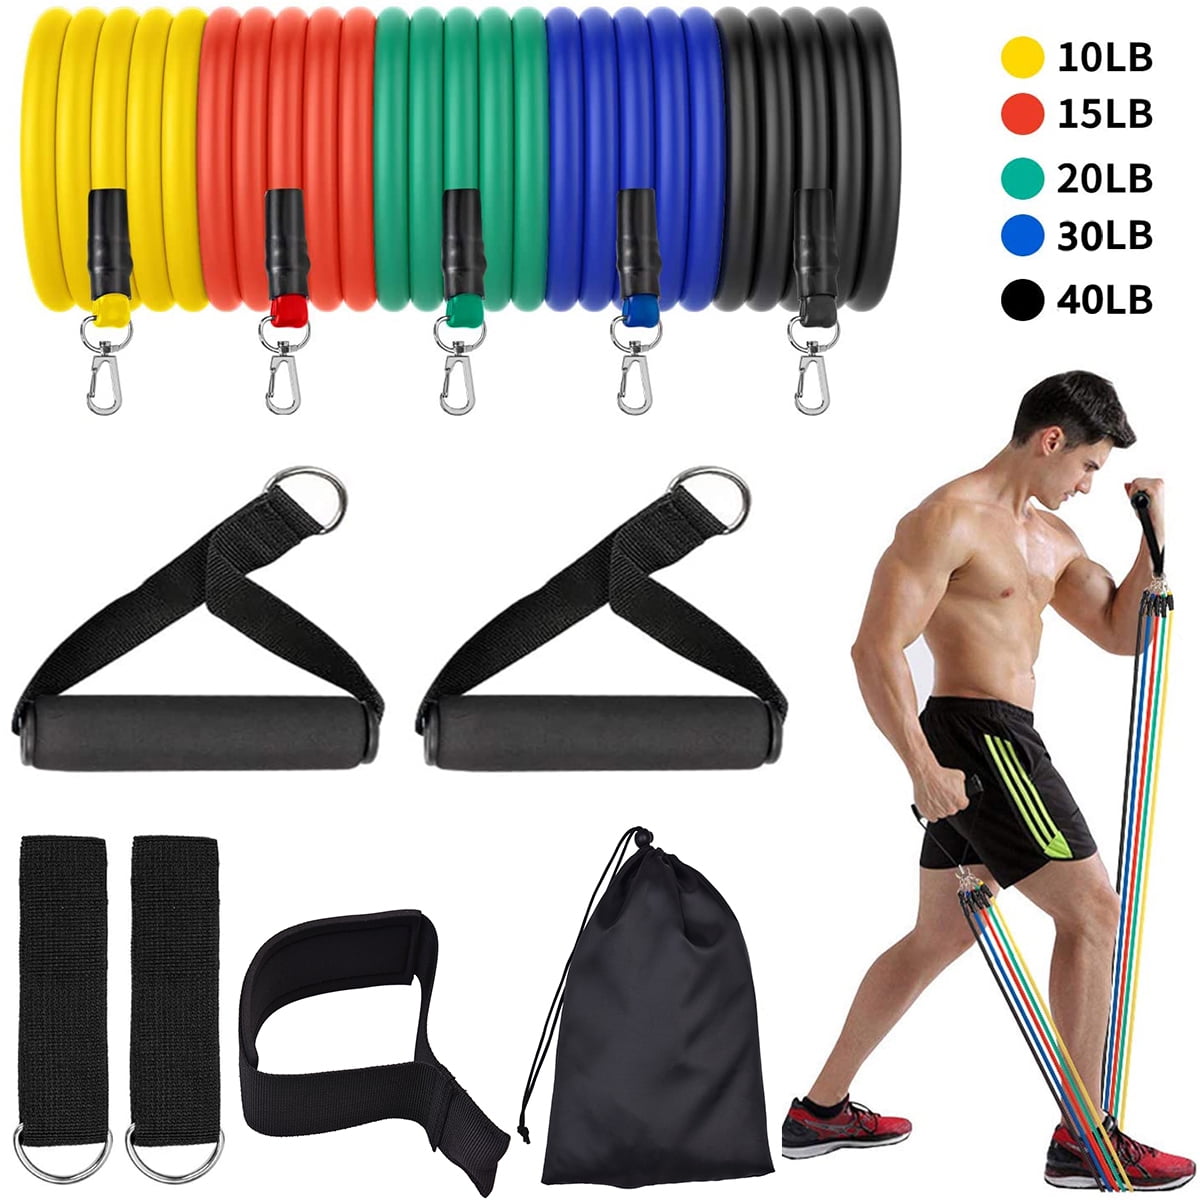 Legs Ankle Straps & Door Anchor Attachment for Women Men Carry Bag Resistance Bands Set Exercise Bands Home Workouts Include 5 Stackable Exercise Bands with Handles